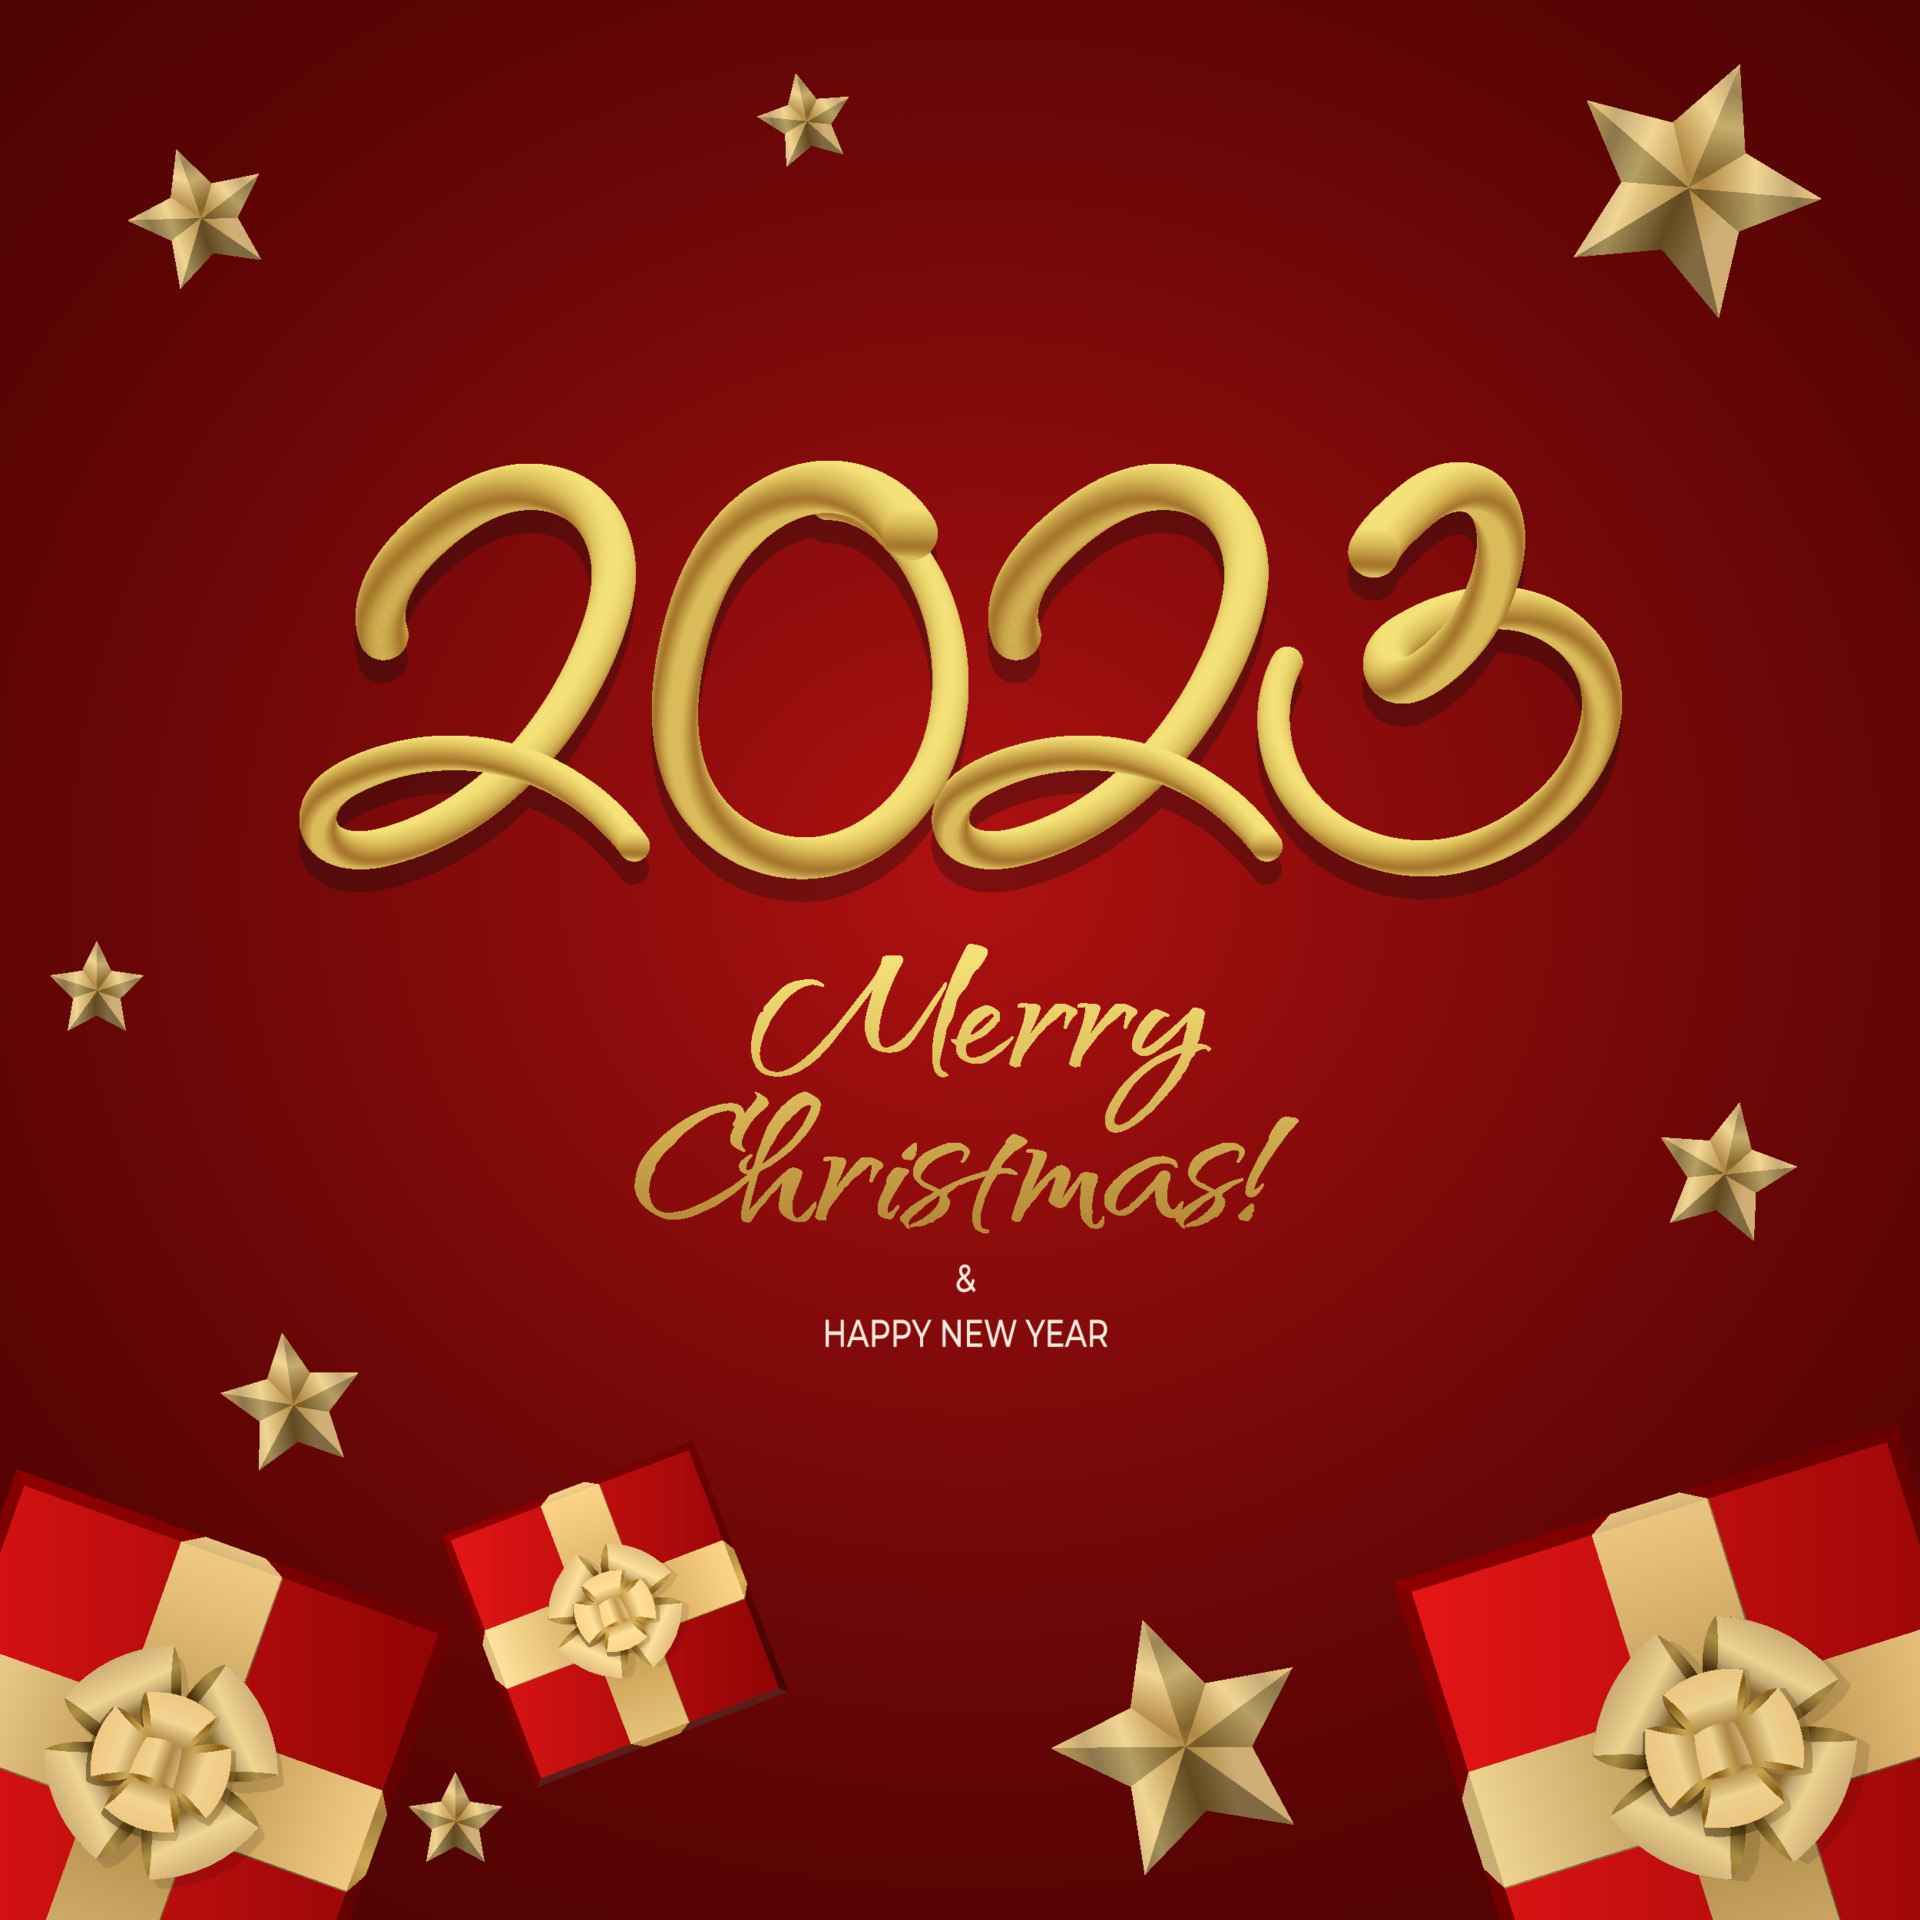 Happy New Year 2023 Greeting Vector Templates Merry Christmas Design Greeting Text With